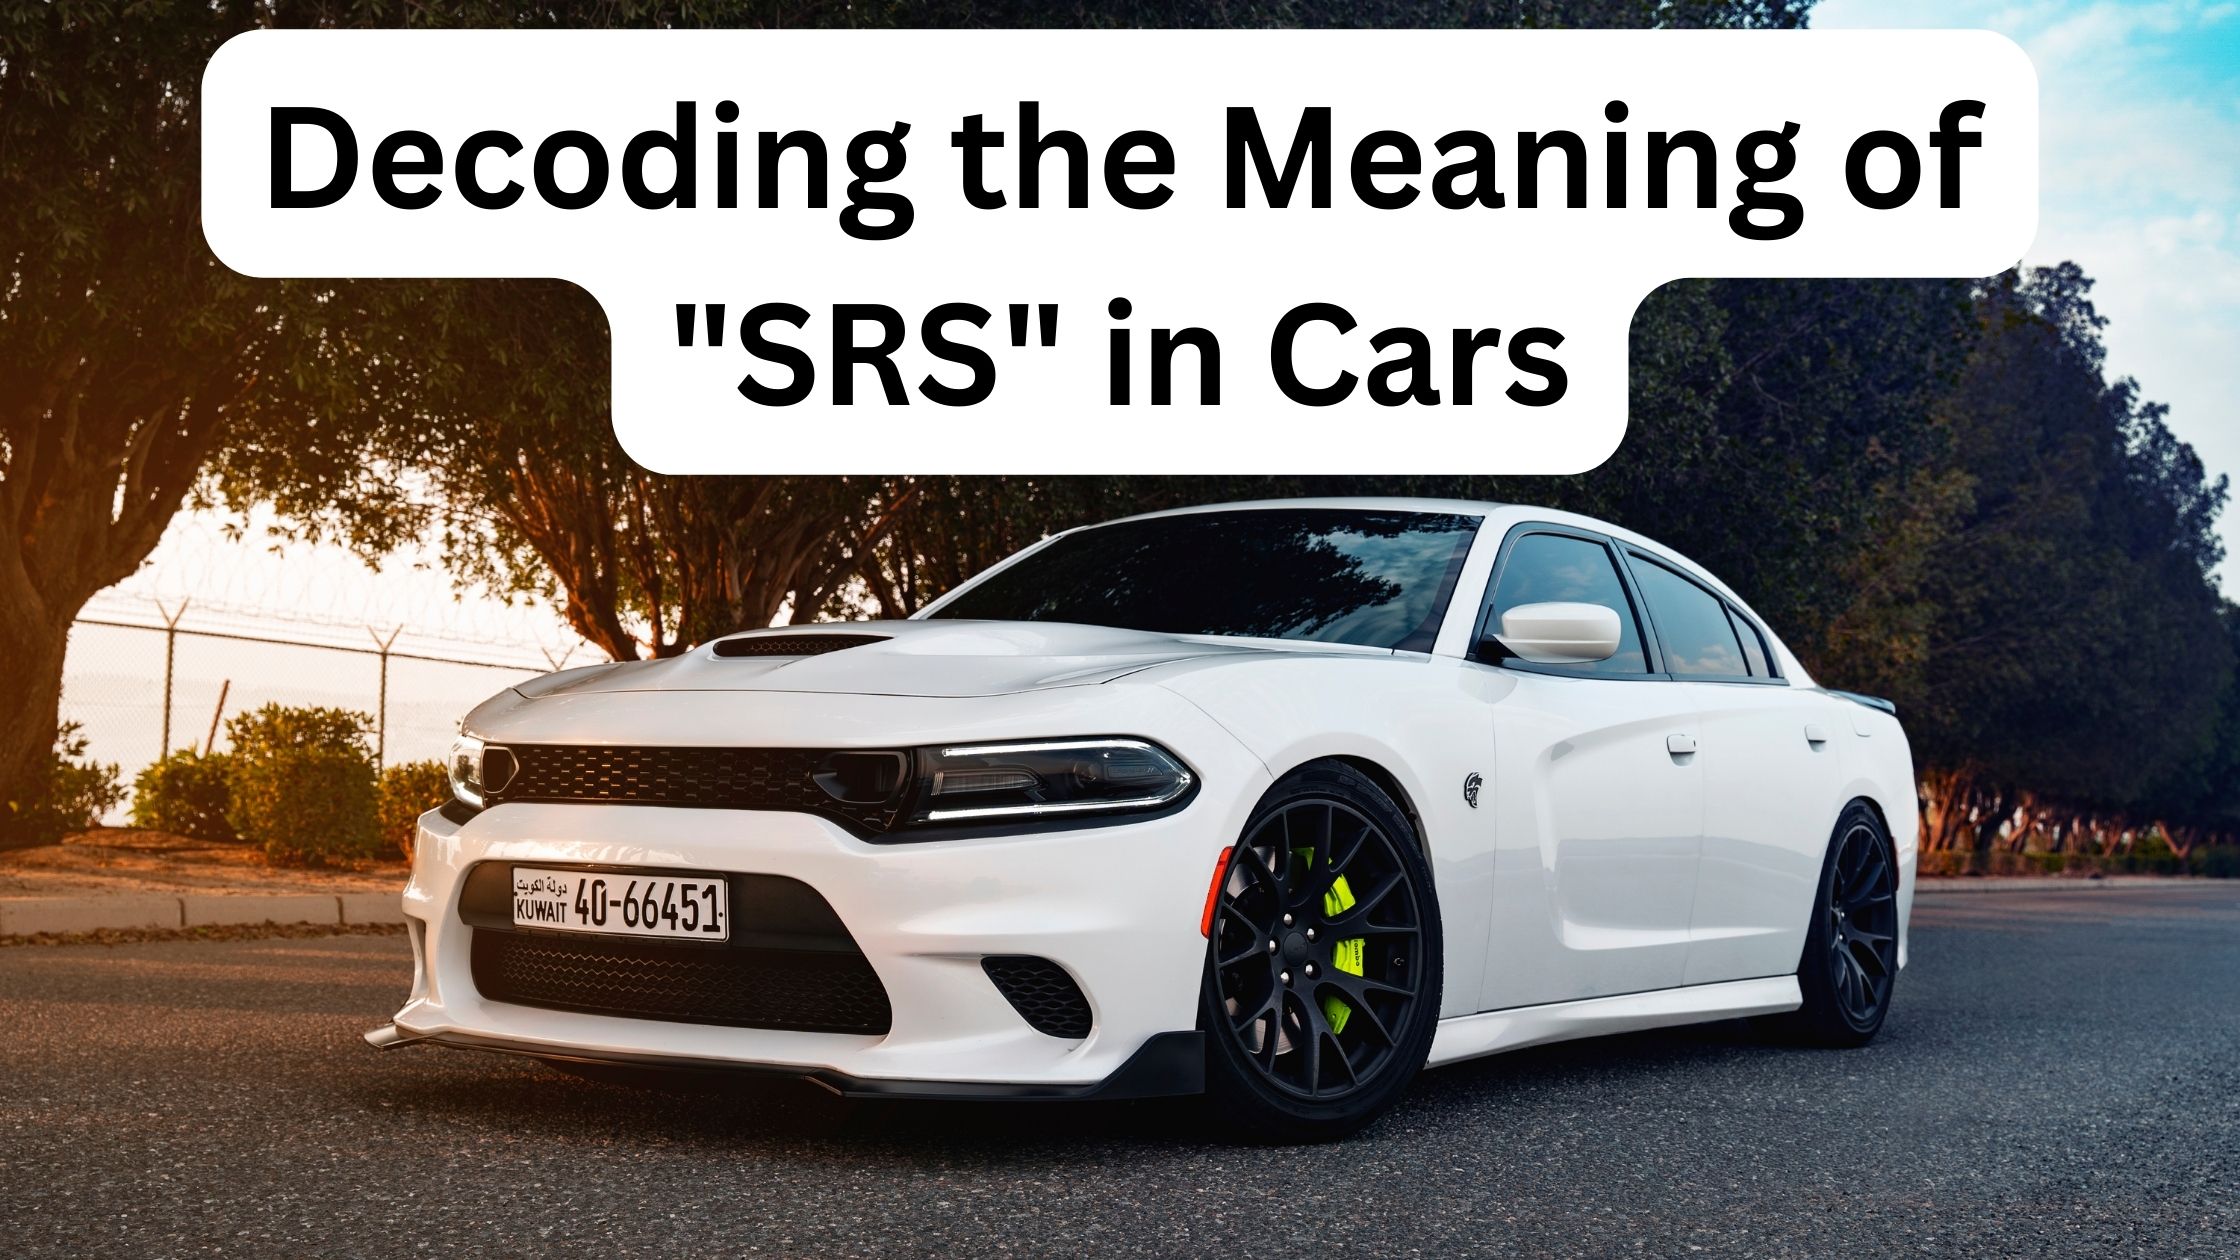 Decoding the Meaning of SRS in Cars